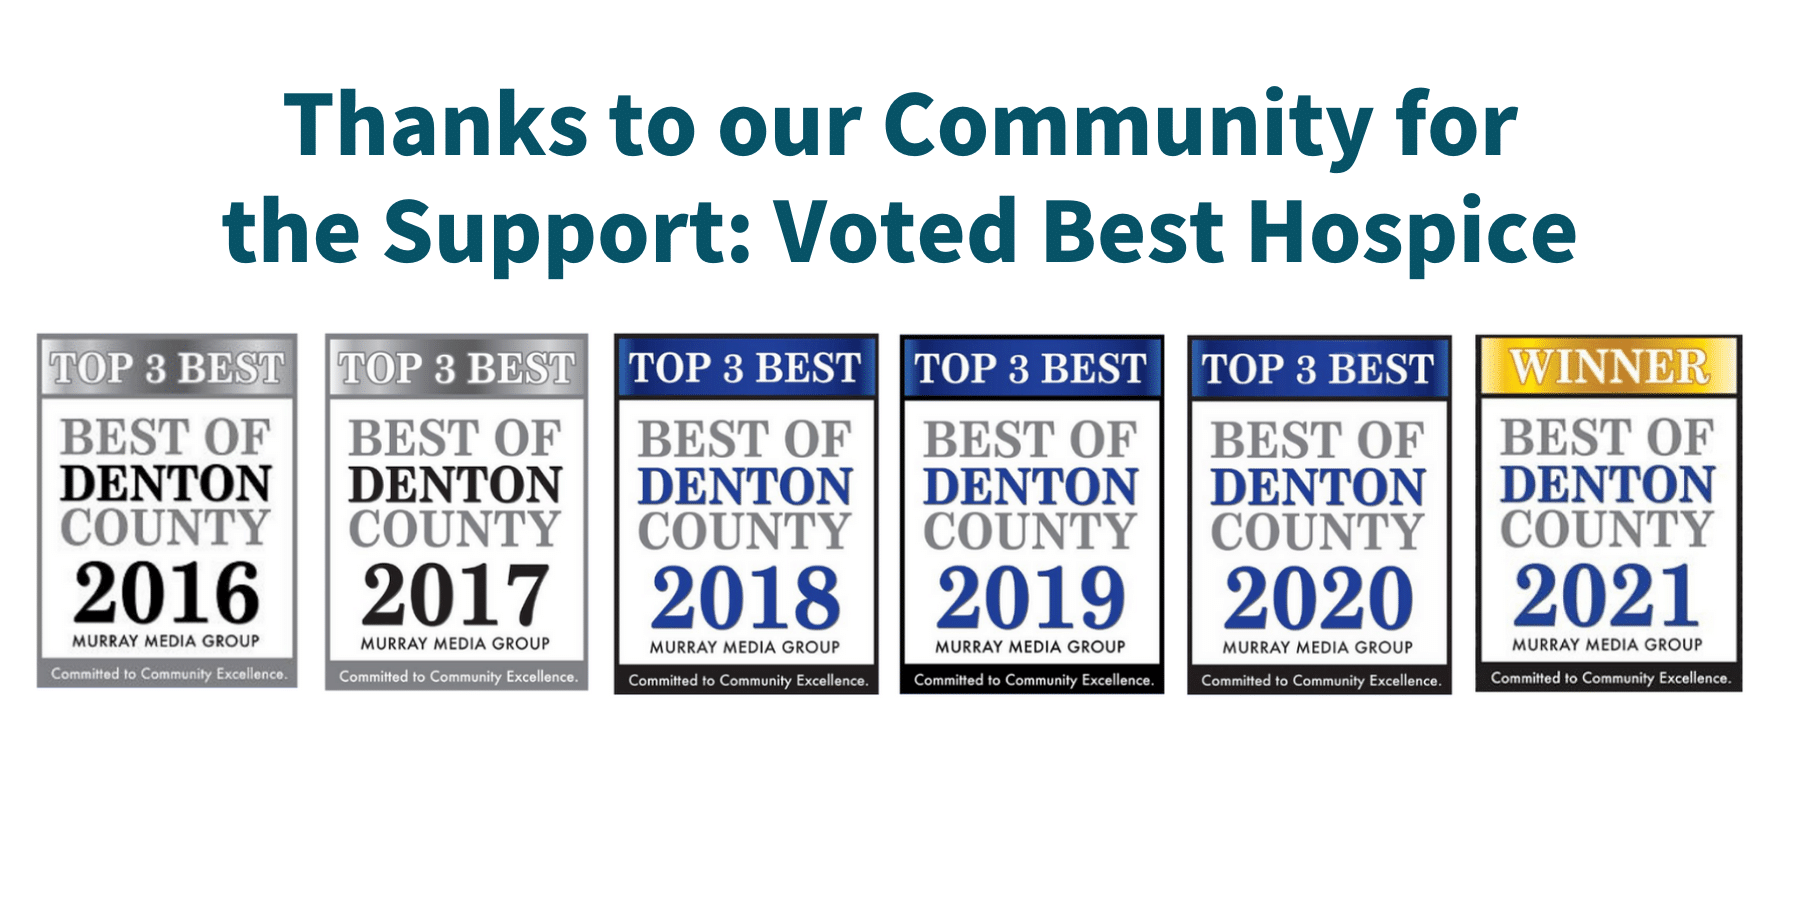 Voted Best Hospice in Denton County